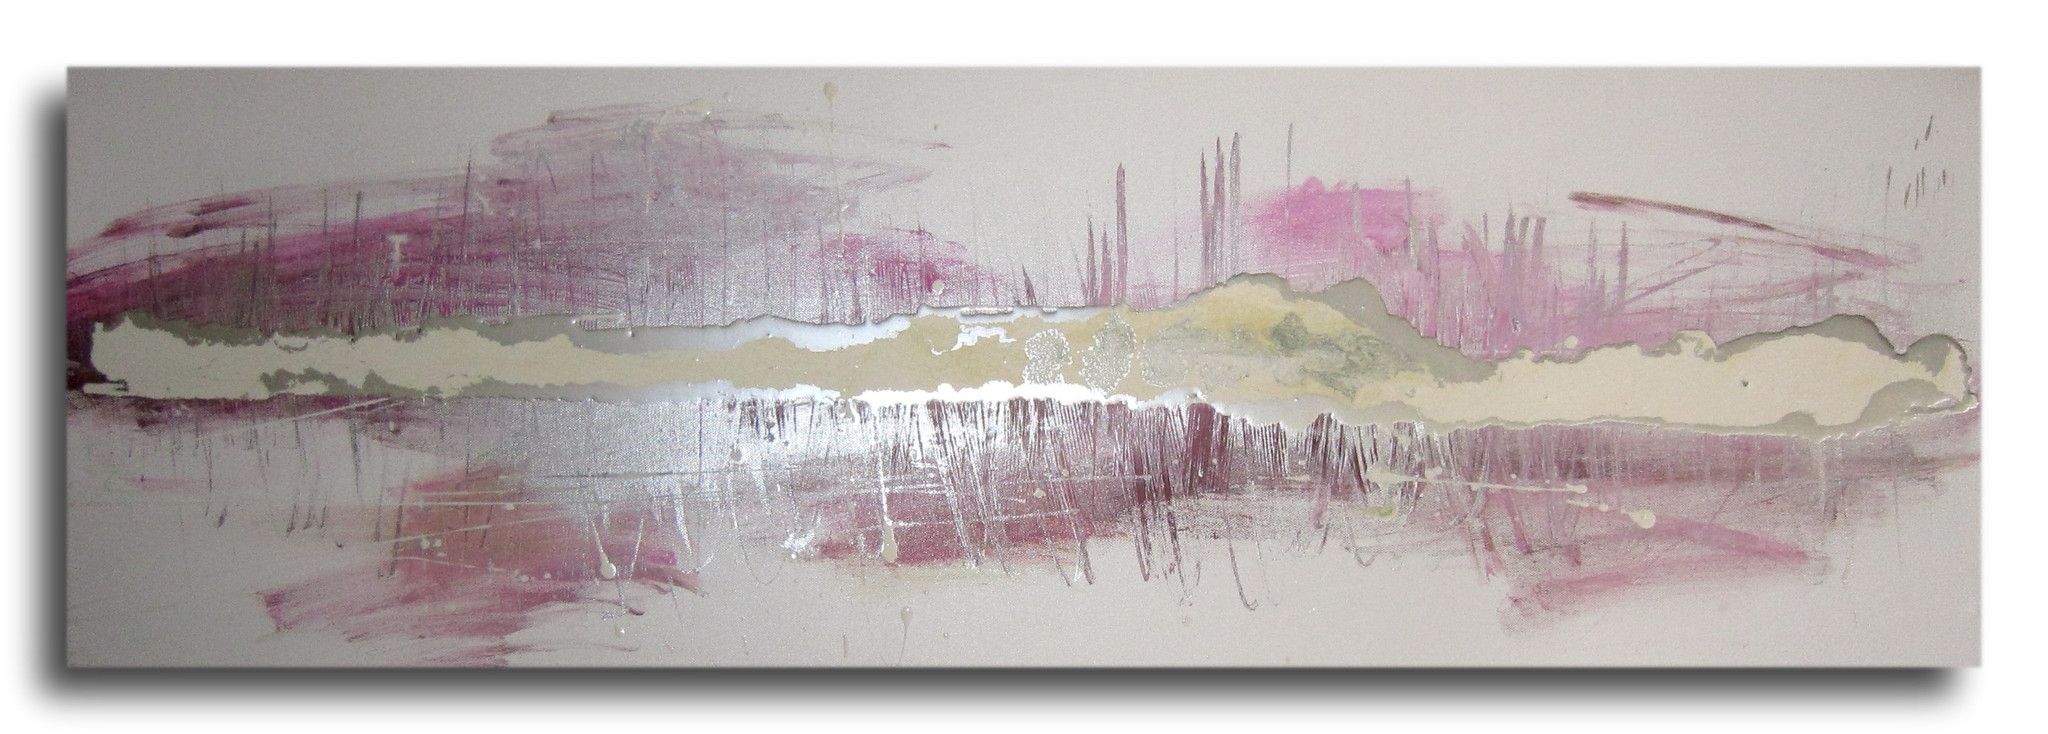 Most Recently Released Pink And White Wall Art Intended For Huge Abstract Canvas Painting Wall Art White Silver Pink (View 3 of 15)